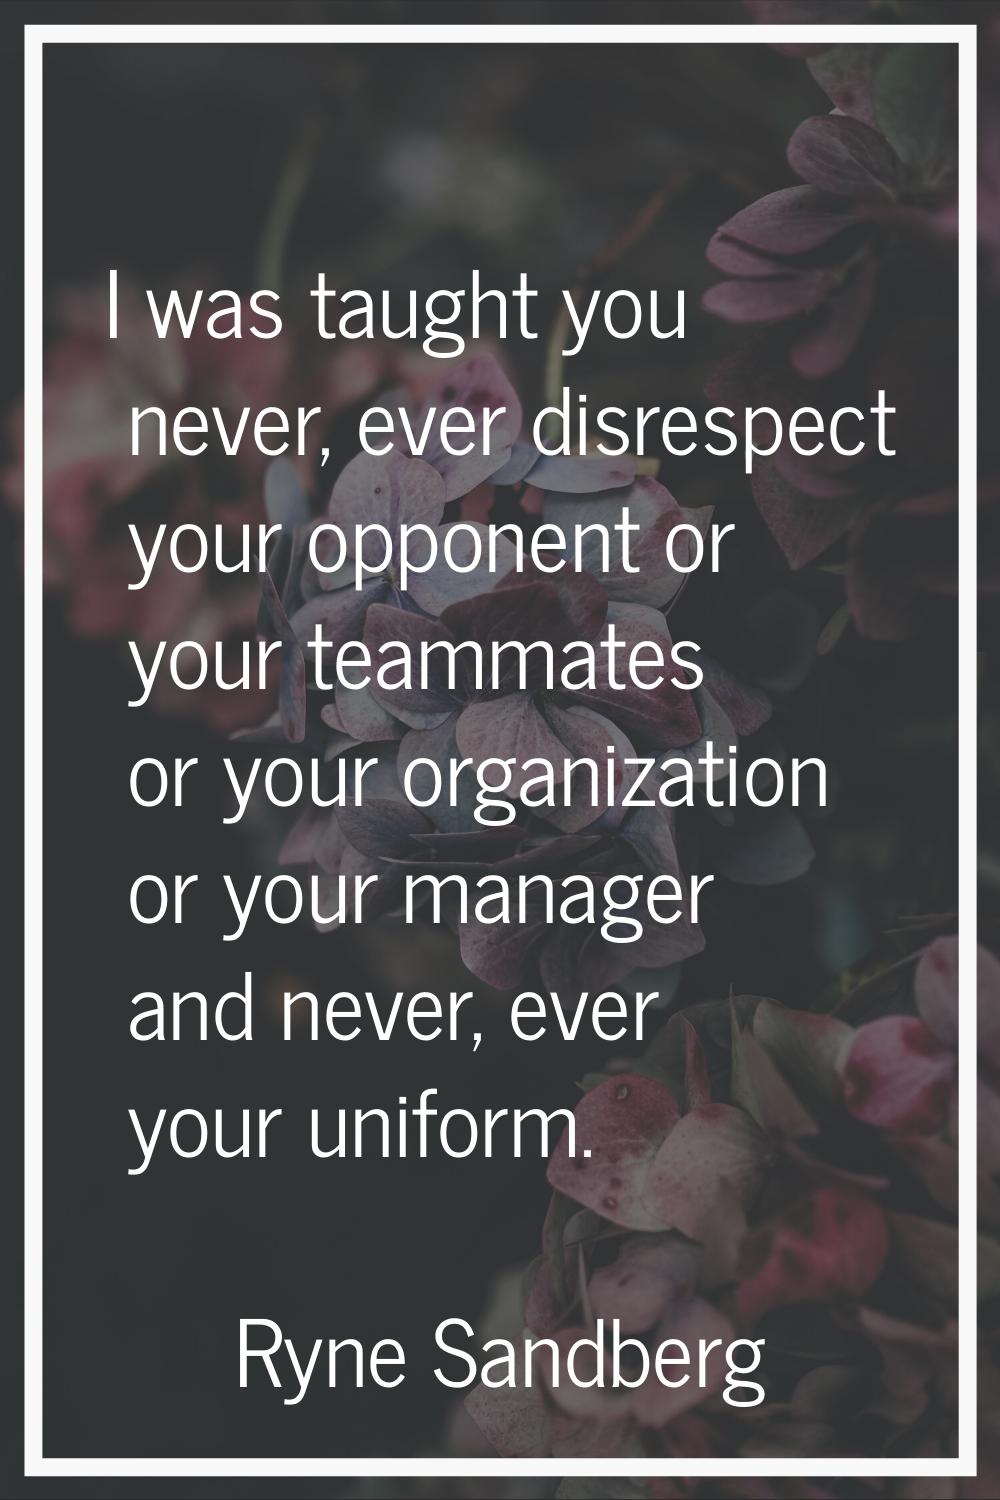 I was taught you never, ever disrespect your opponent or your teammates or your organization or you